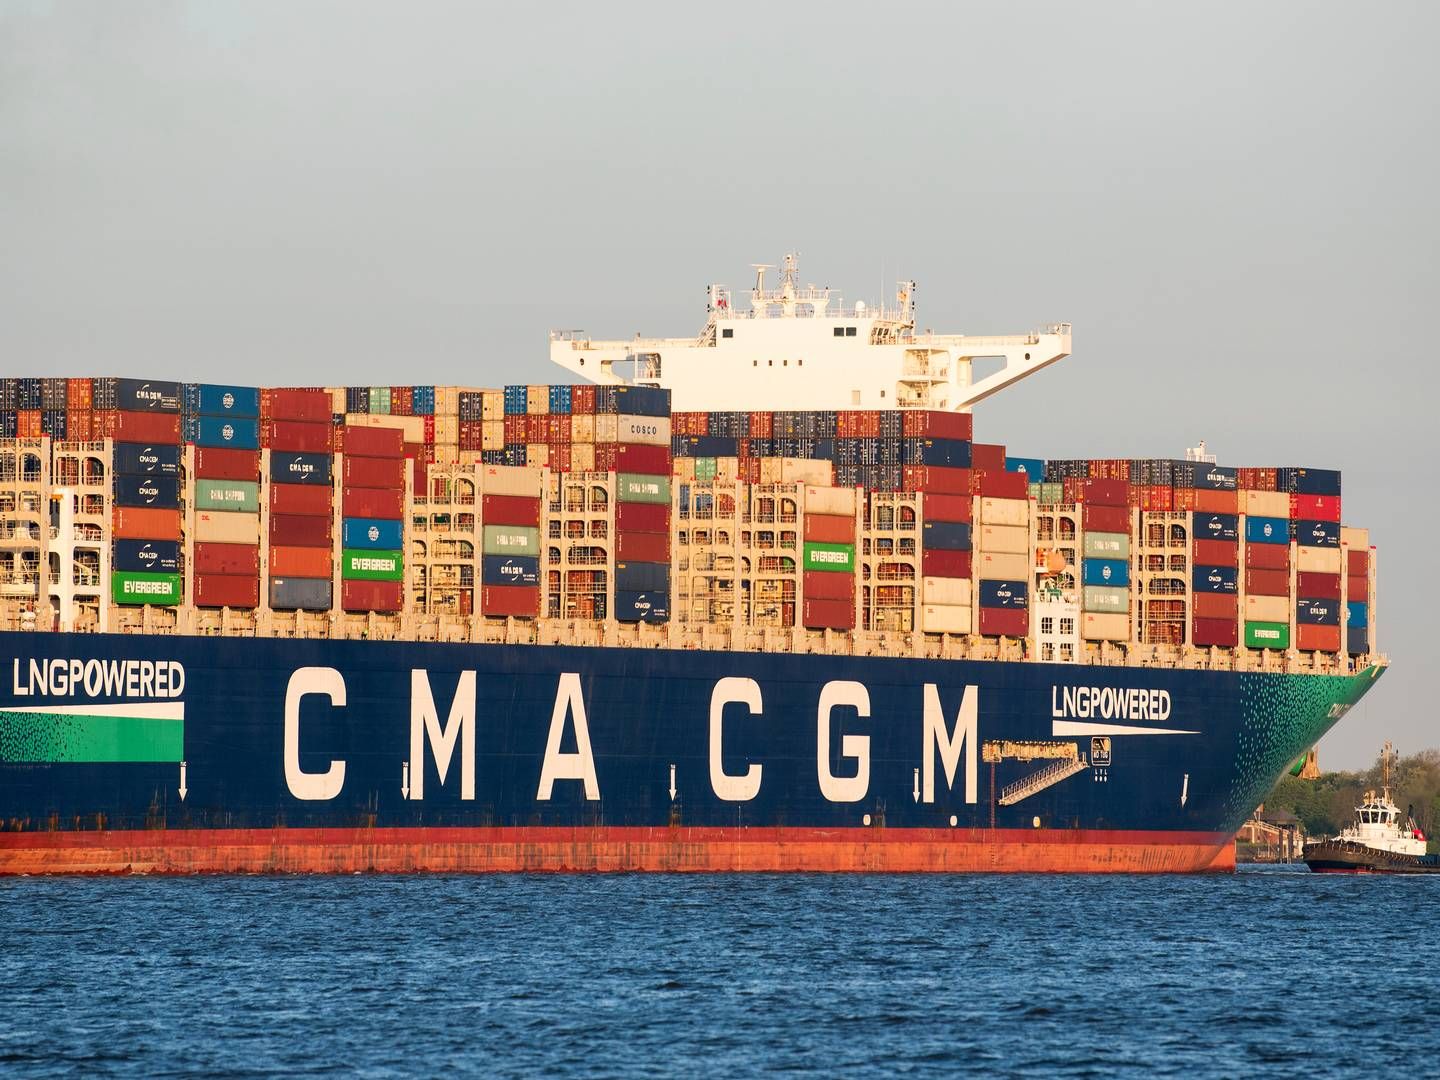 A CMA CGM container ship leaves port terminal - is not the actual ship CMA CGM Tage.